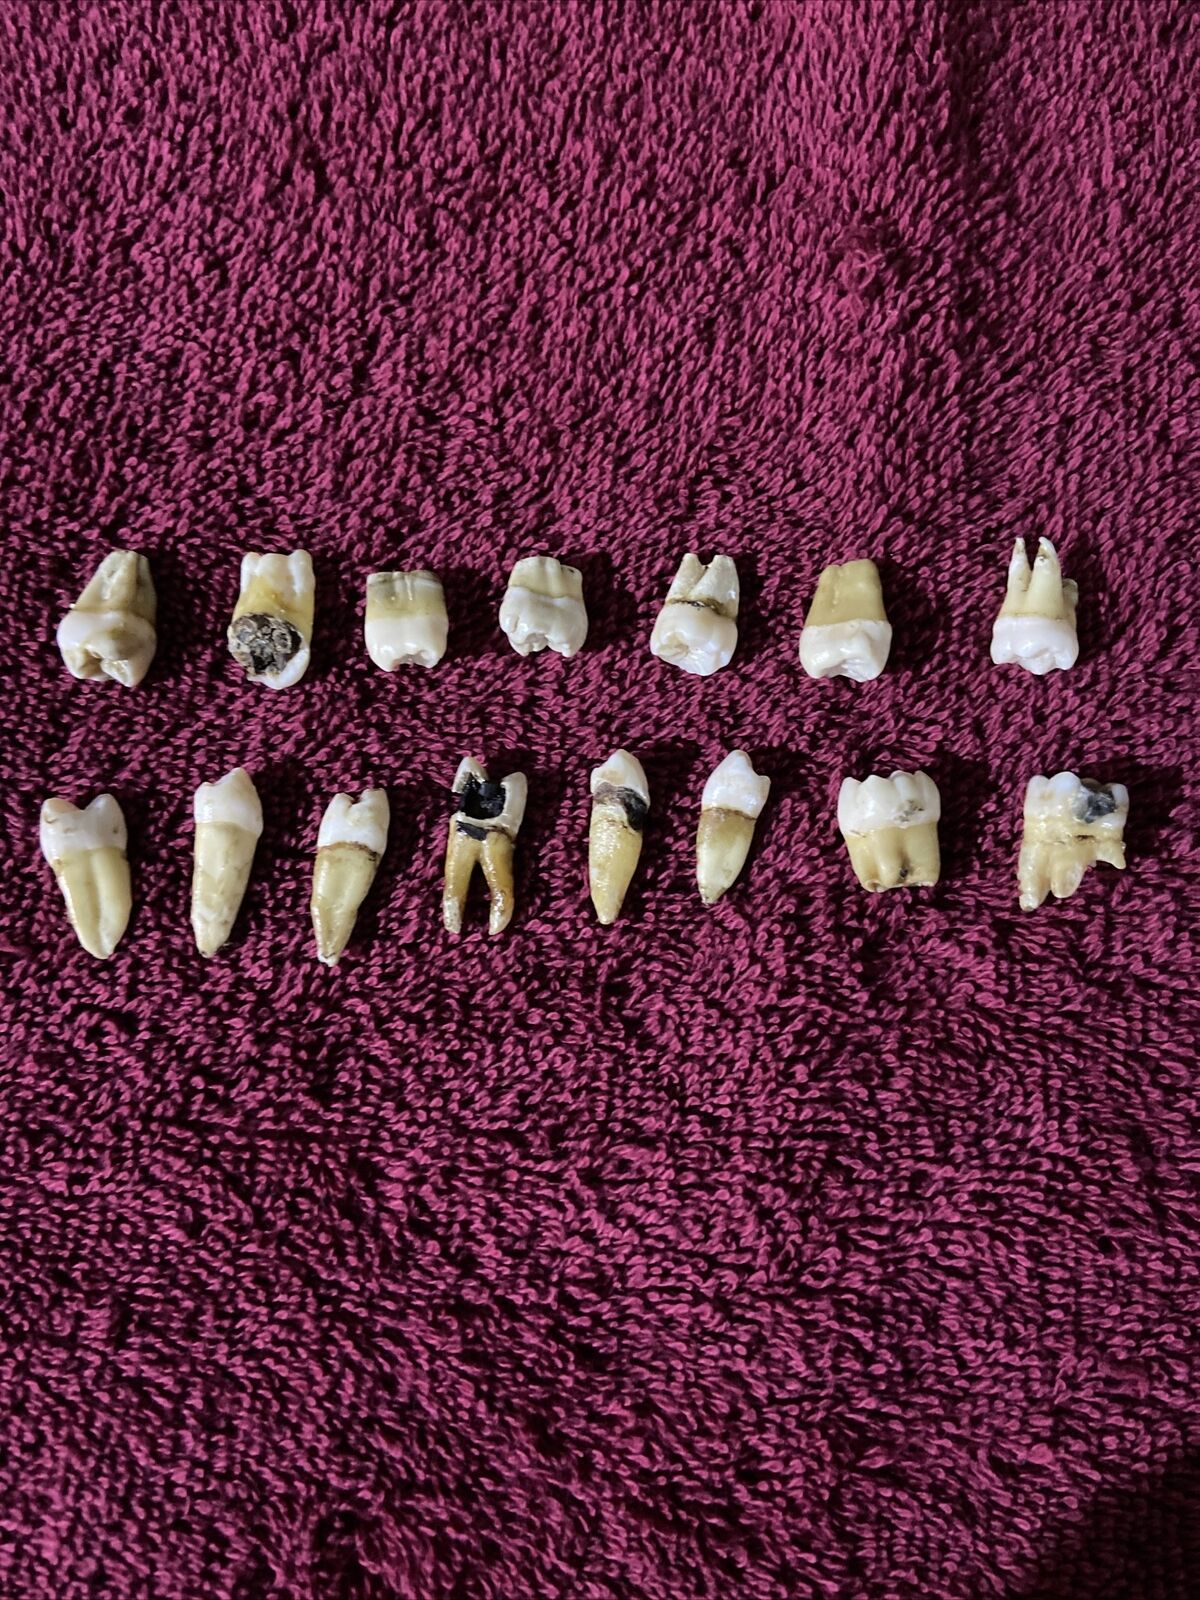 15 Human Teeth Extracted for Research and Dental Studies Molars Premolars